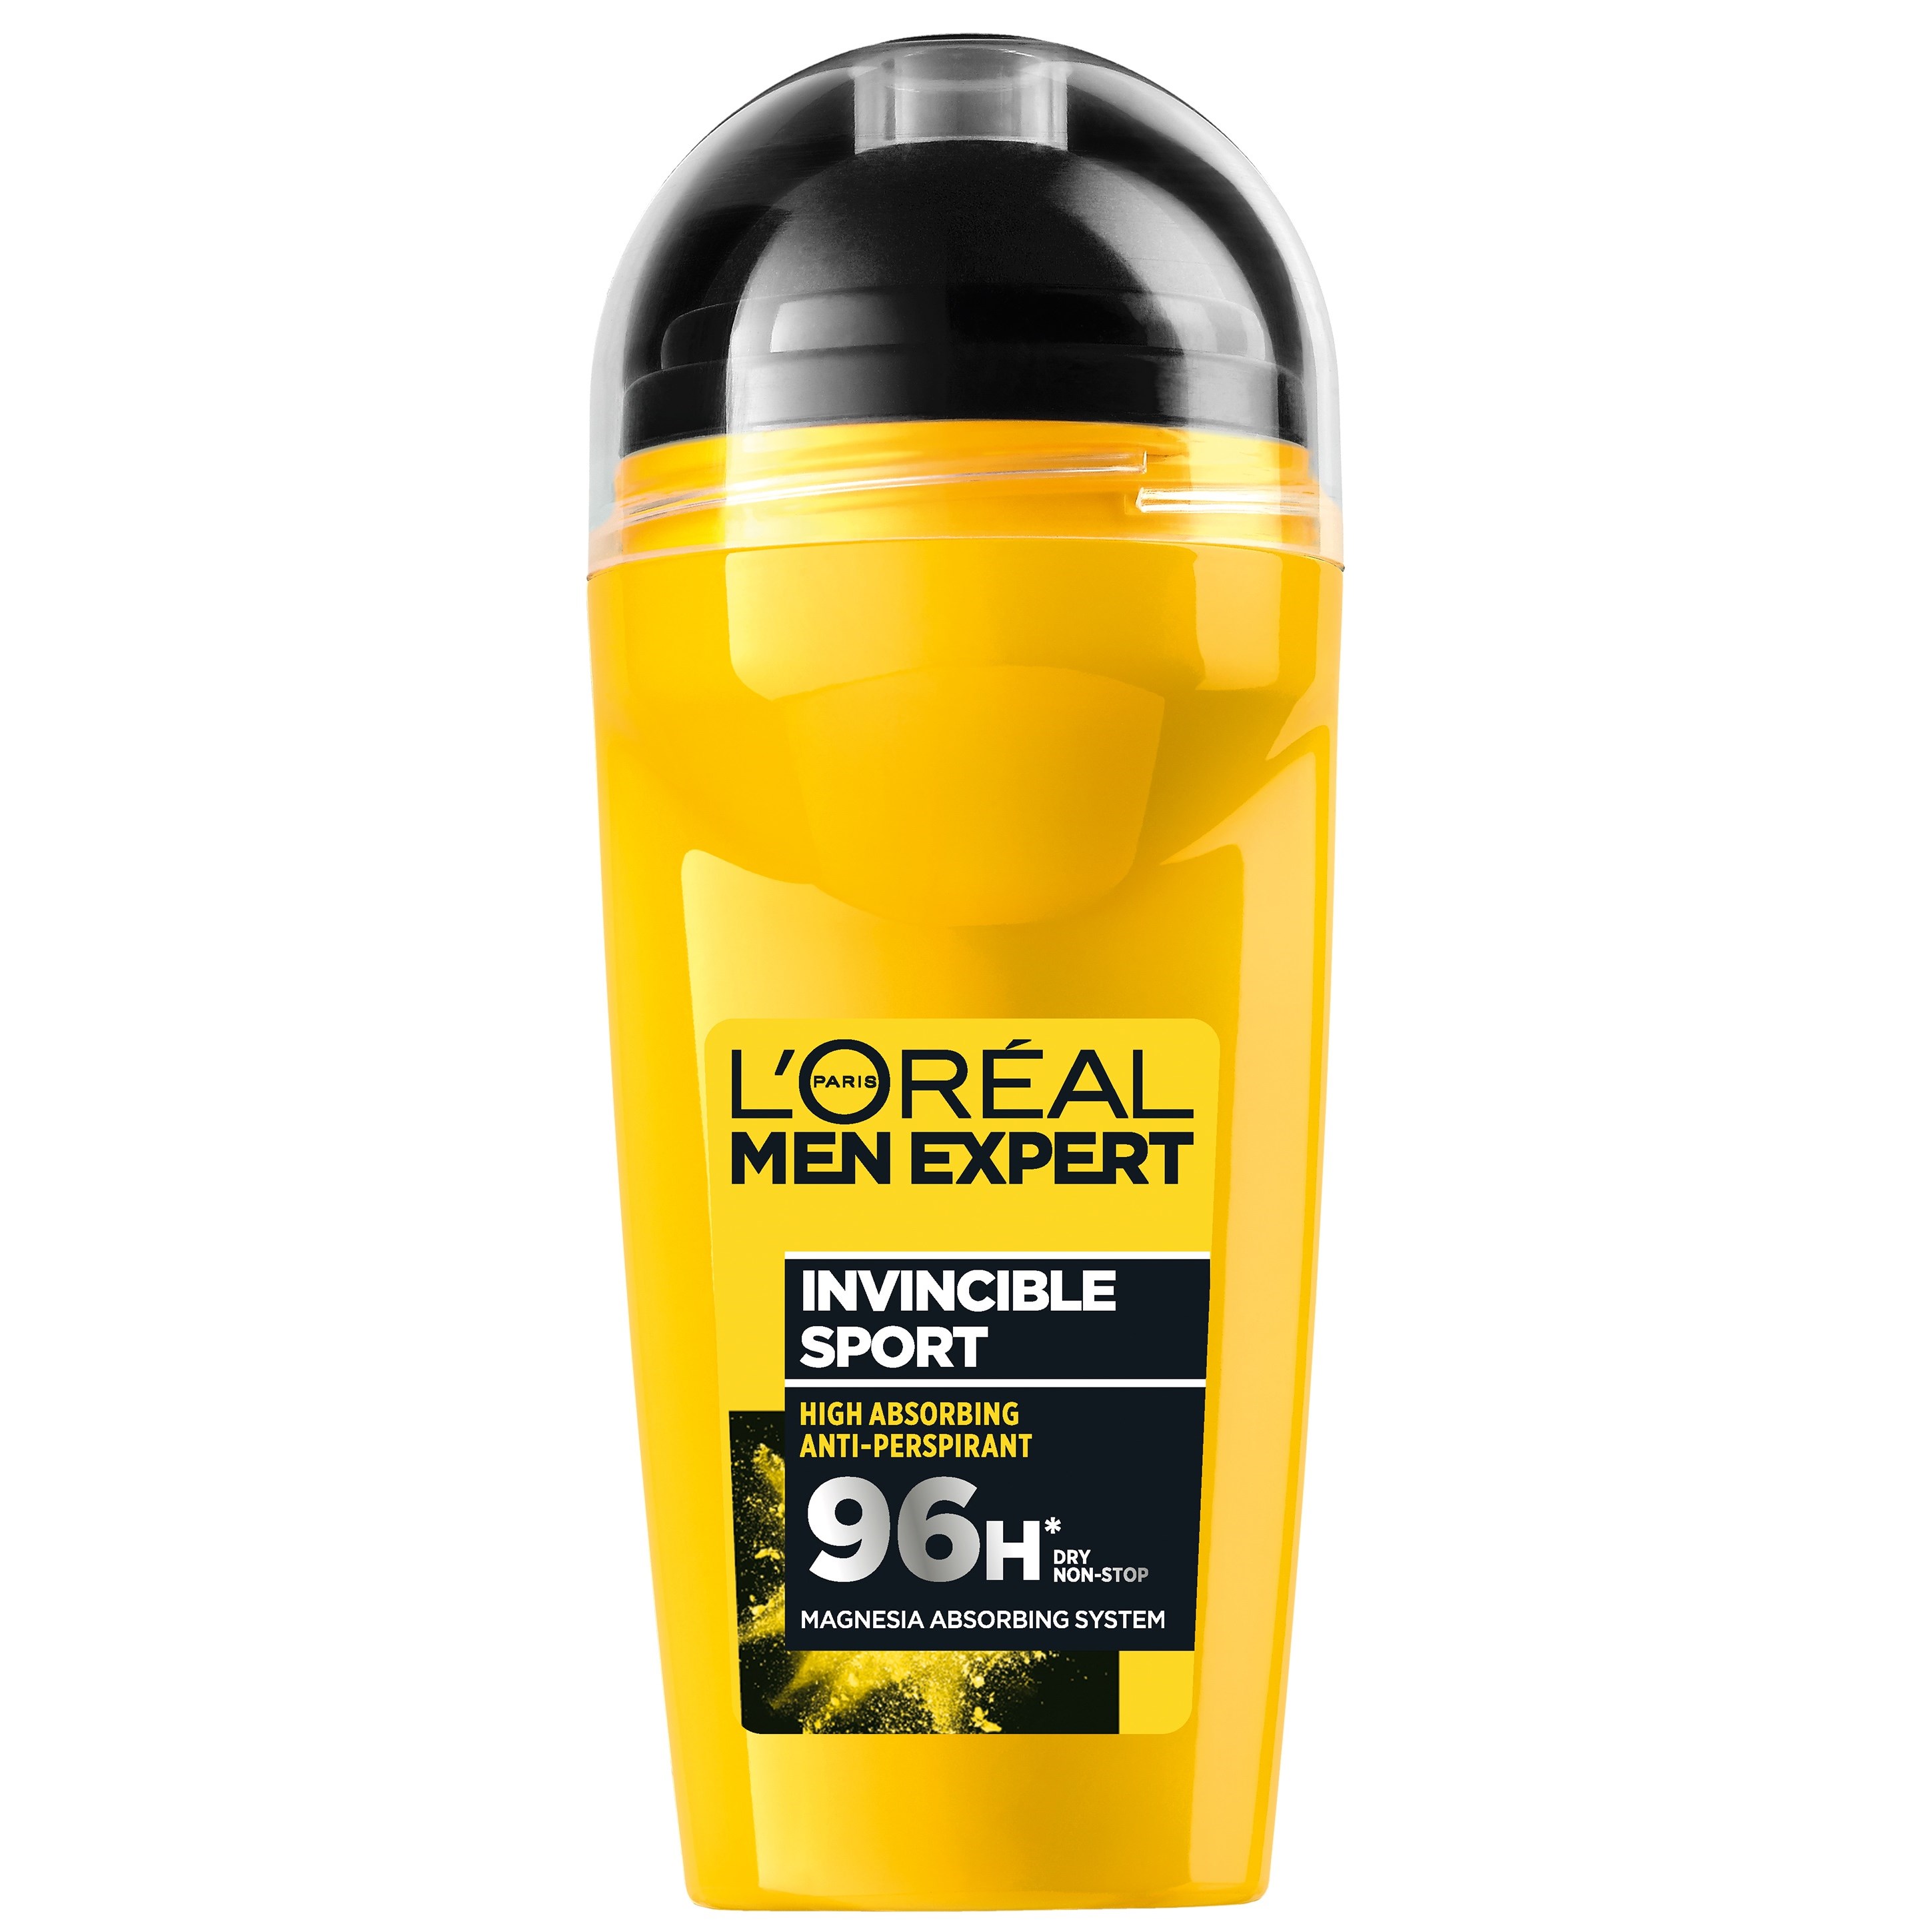 Loreal Paris Men Expert Deo 96 H Invincible Sport Dry Non-Stop Roll-on